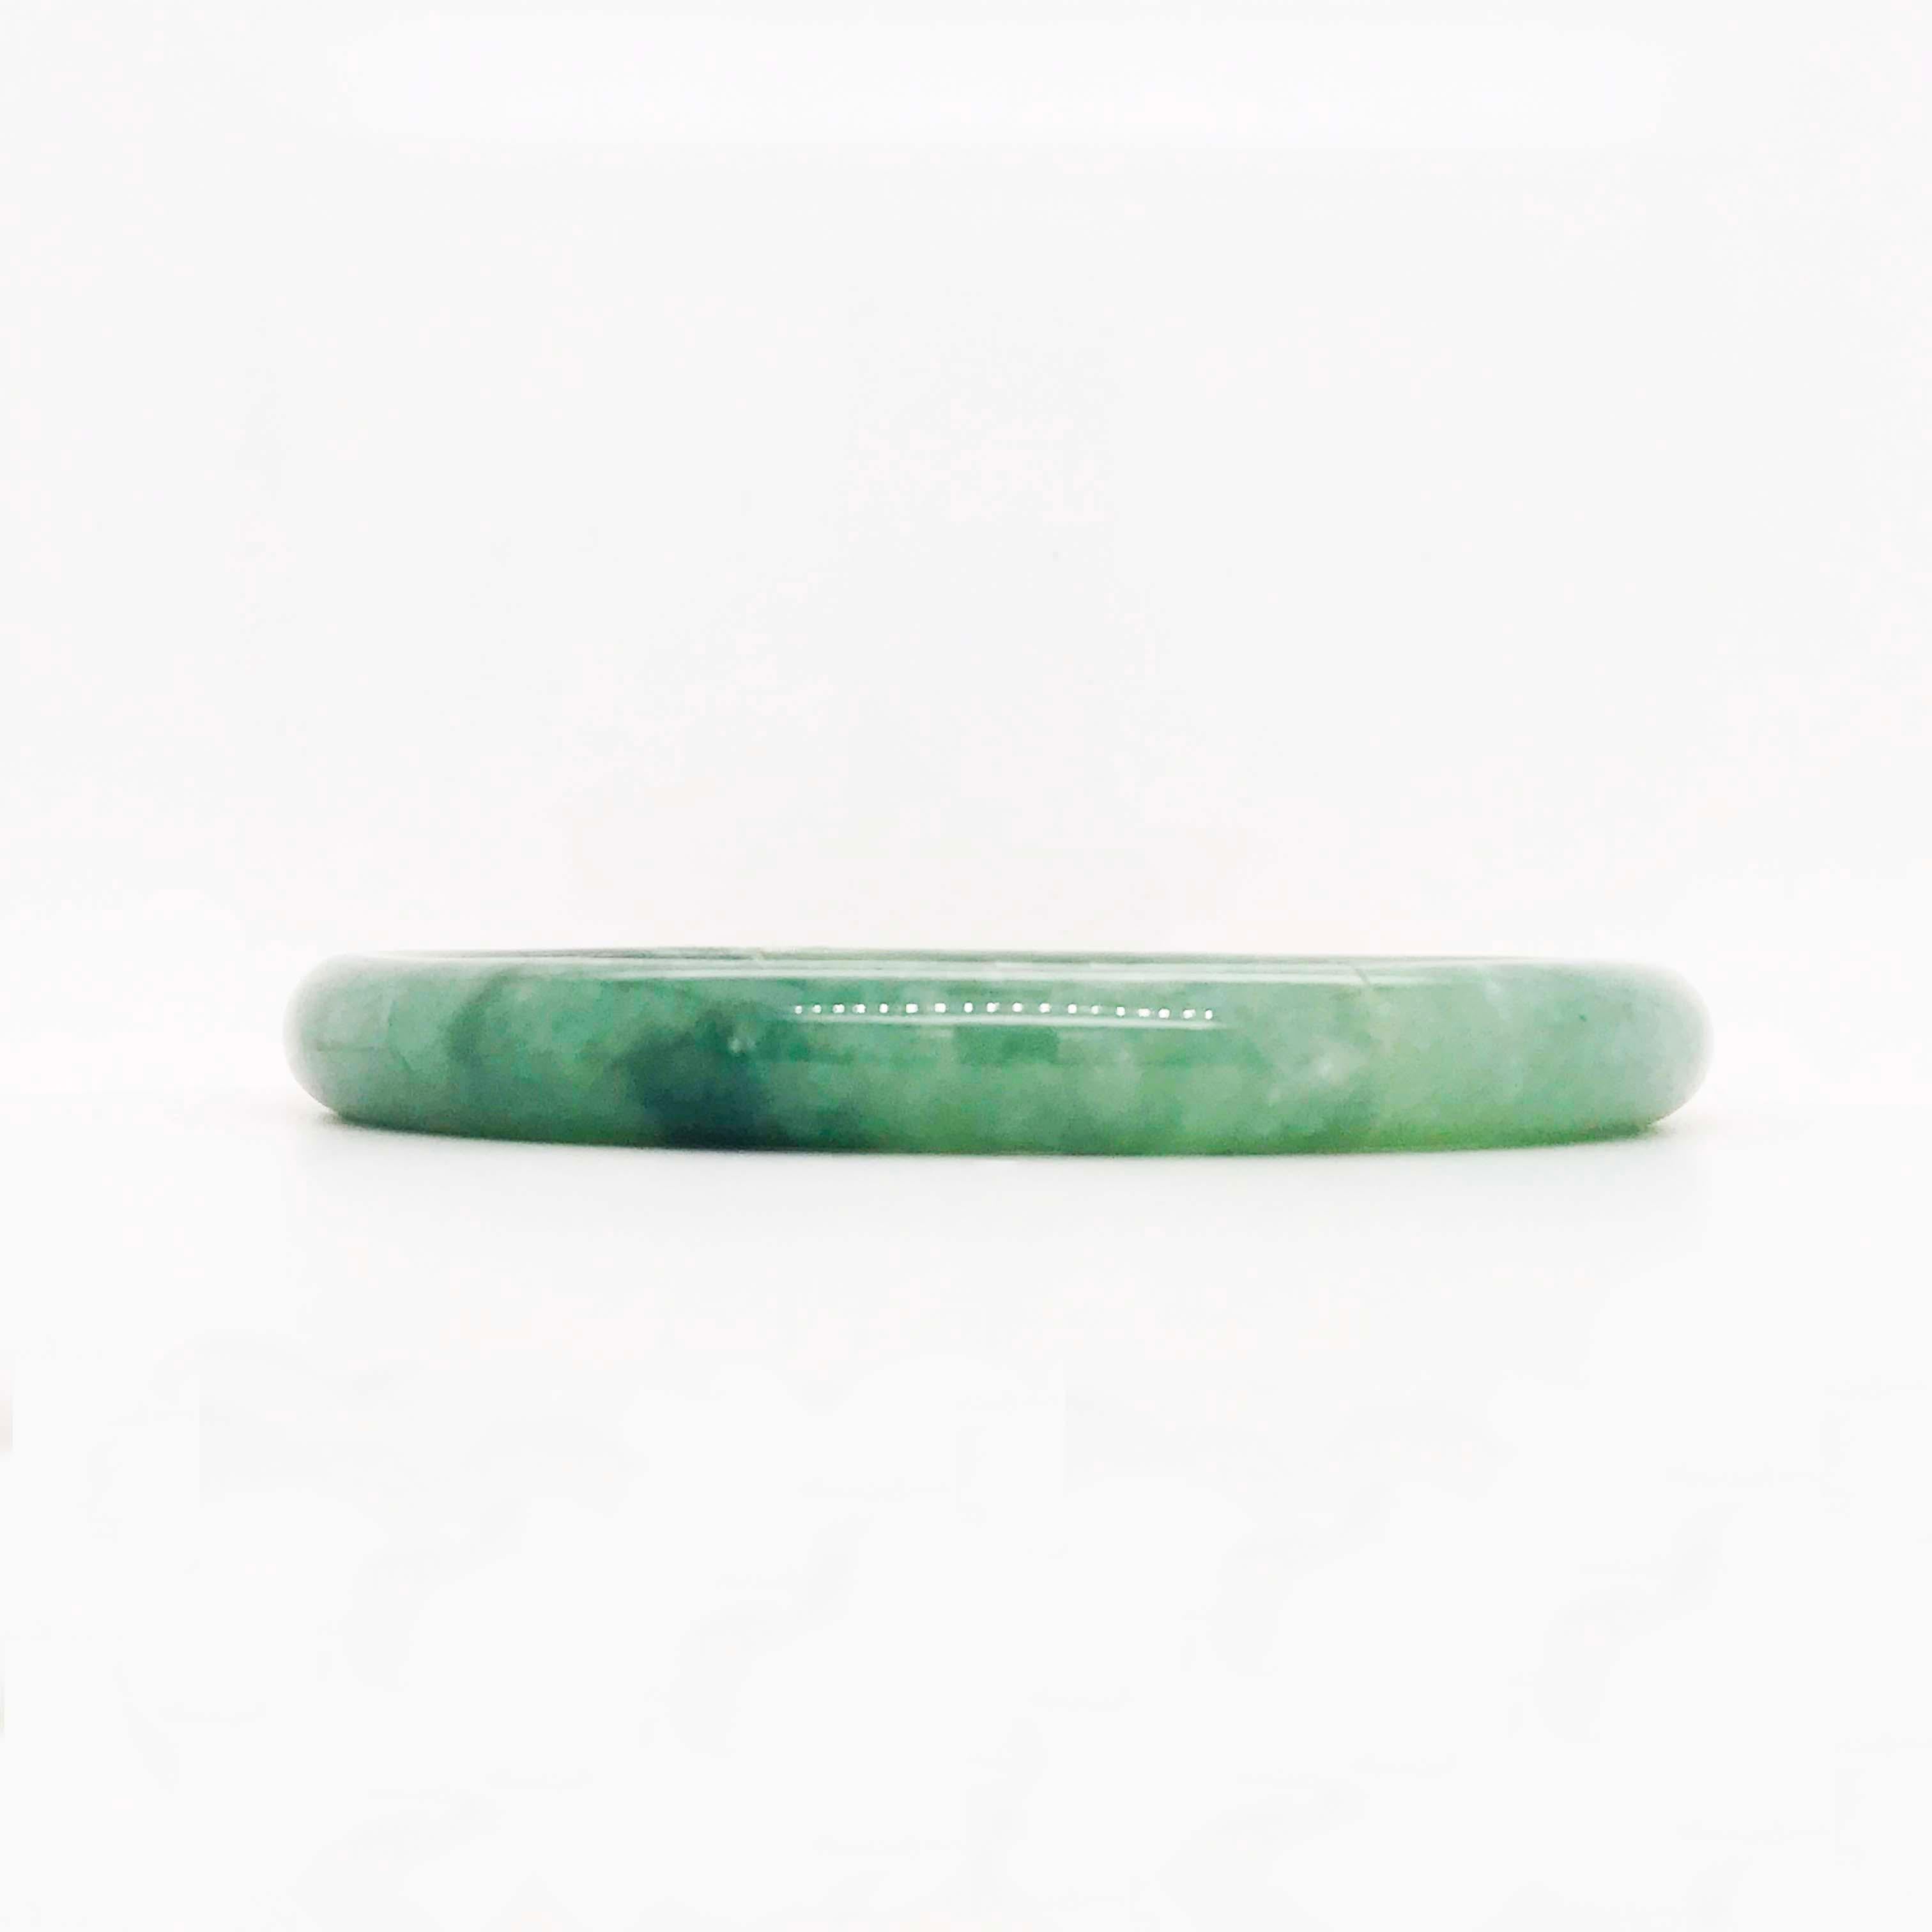 This natural, authentic jade bangle bracelet has beautiful molten dark to light green colors. It would be a joy to wear as jade is known for its protective and positive properties!  There are two types of jade-nephrite and jadeite. Jadeite jade is